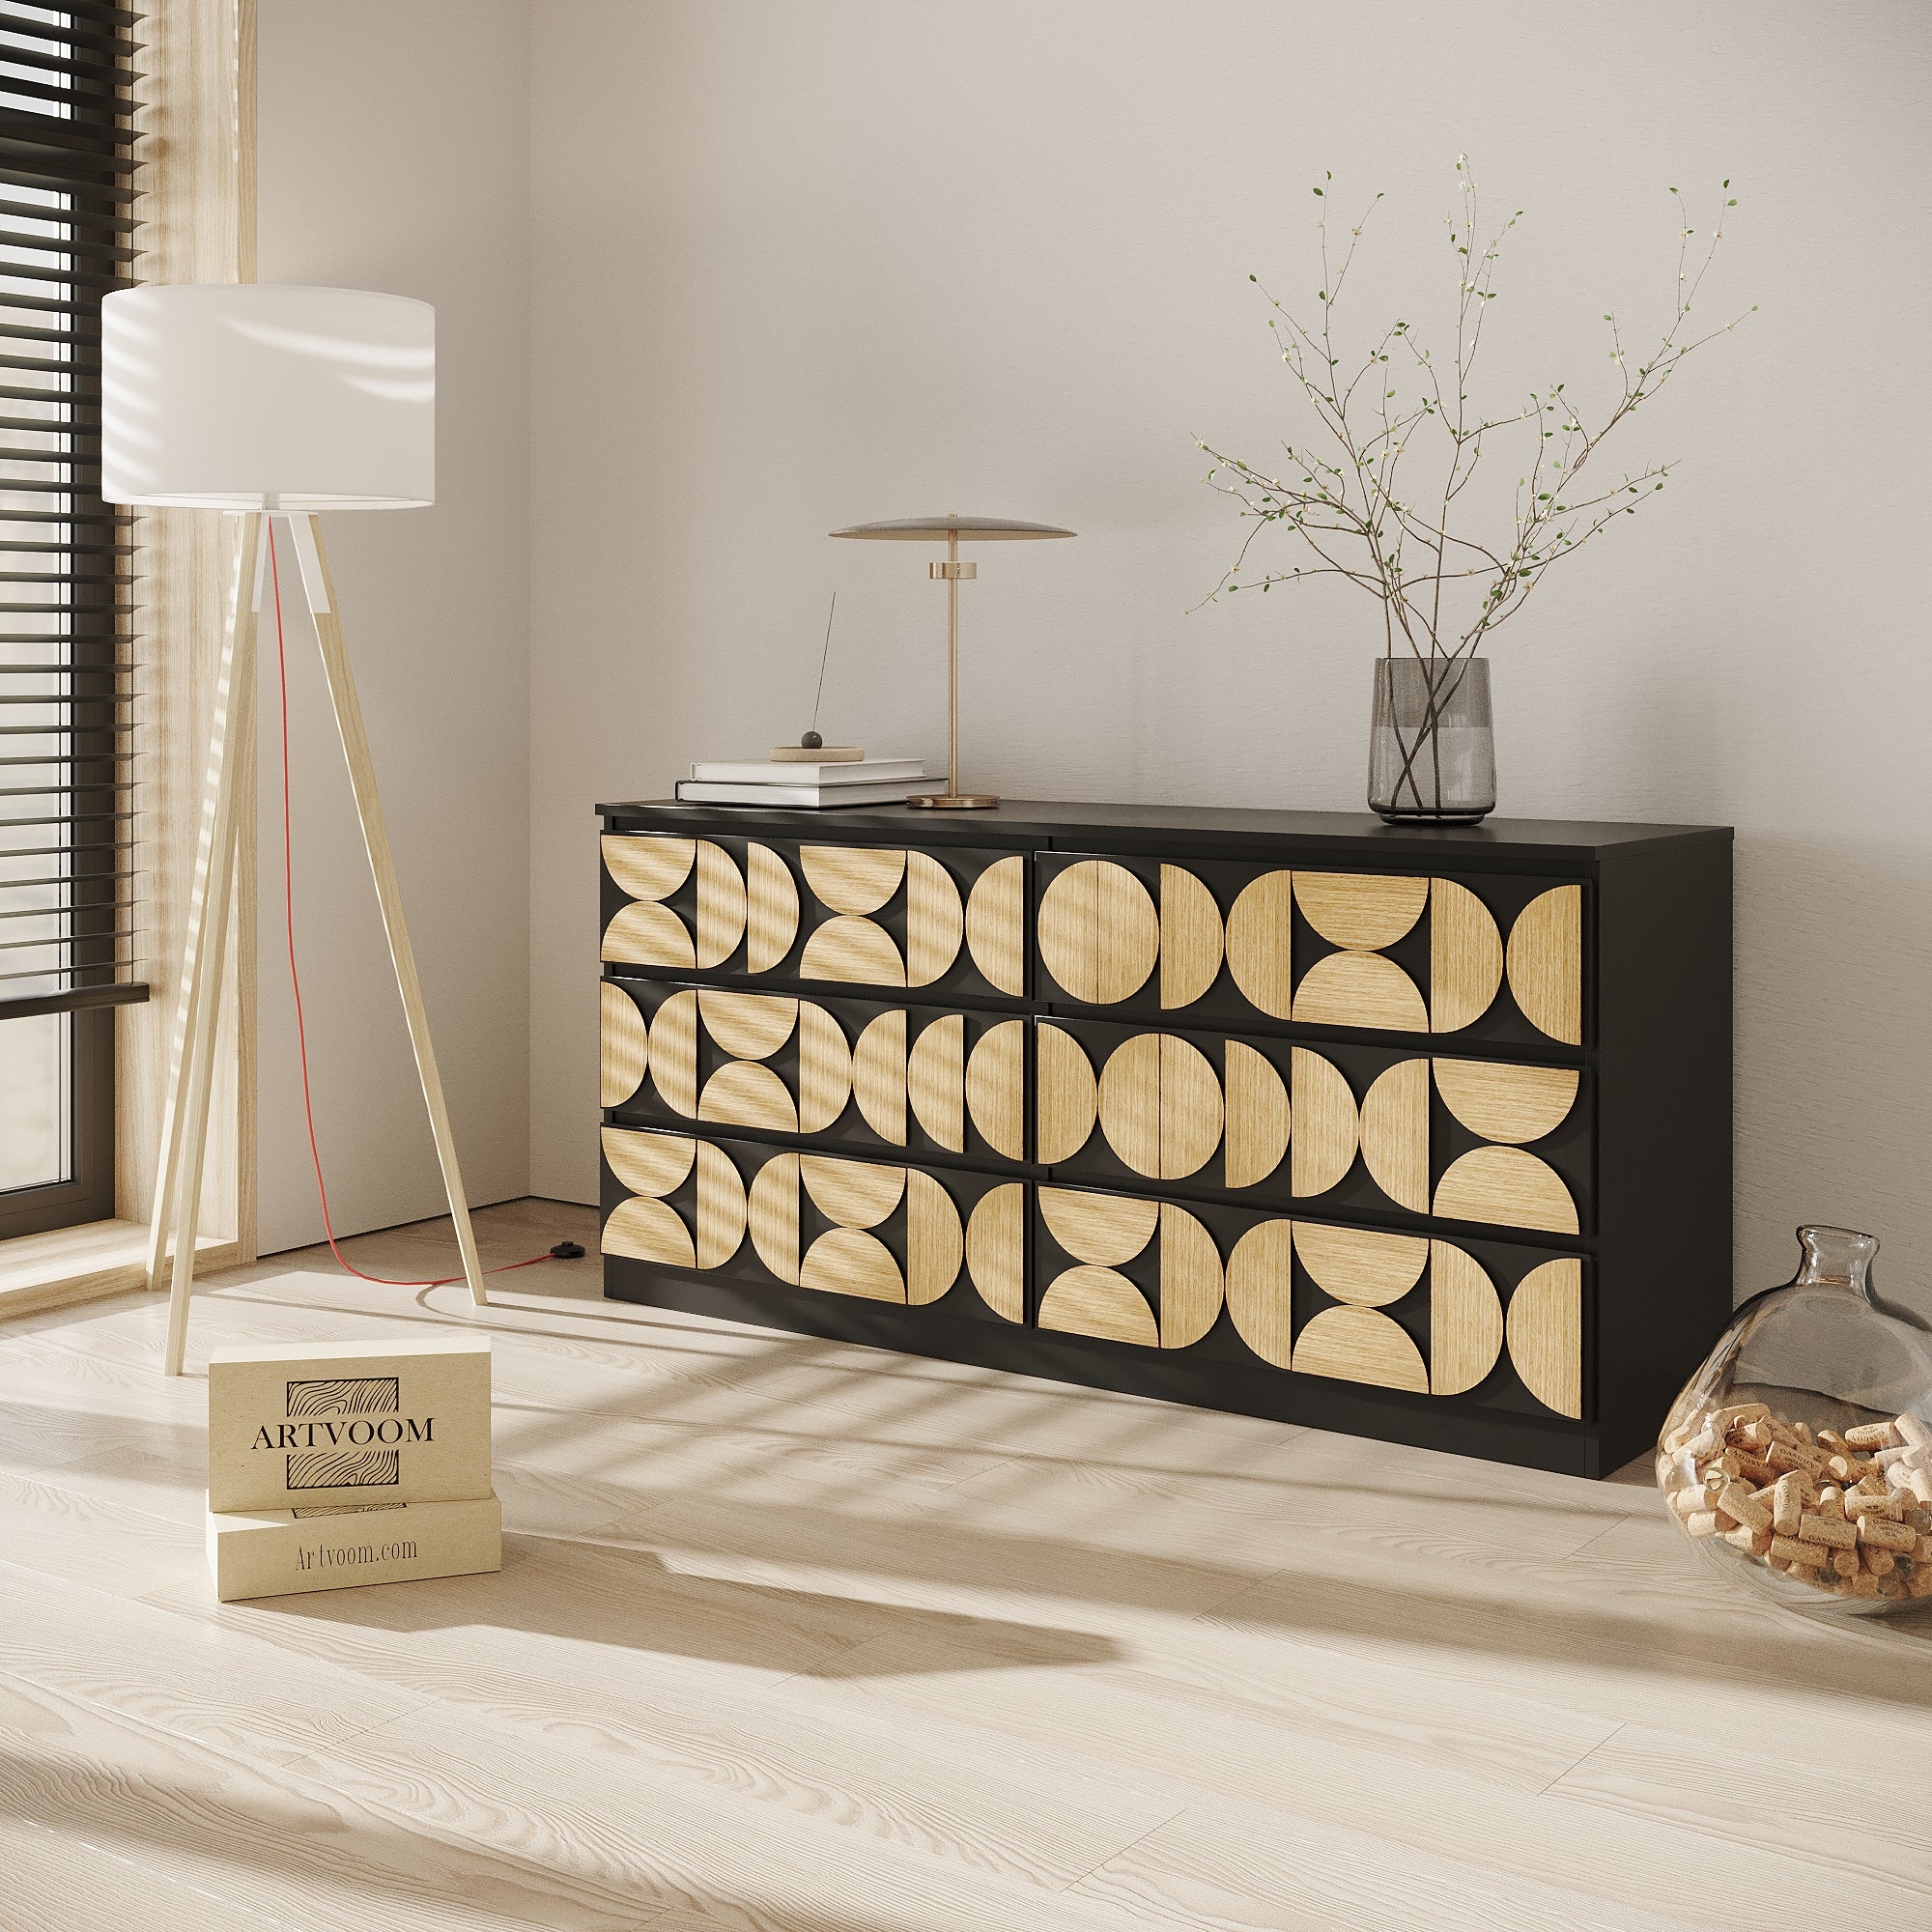 Overlay wooden panels for decorating ikea dresser with pattern - Artvoom